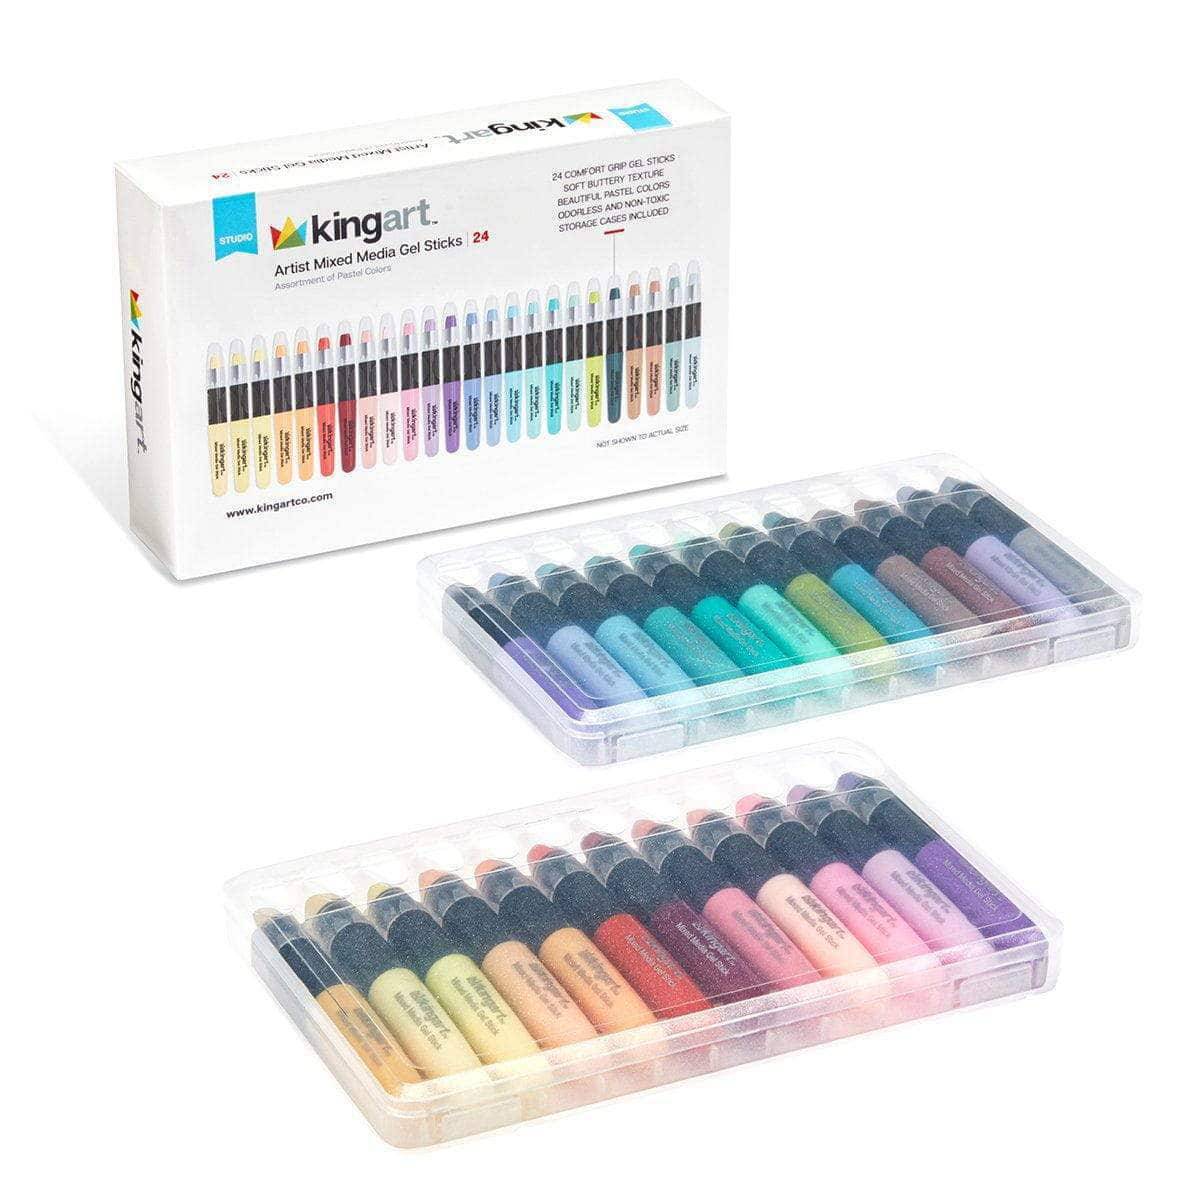 KINGART 580-72 GEL STICK Set, Artist Pigment Crayons, 72 Unique Colors,  Water Soluble, Creamy, and Odorless, Use on Paper, Wood, Canvas and more